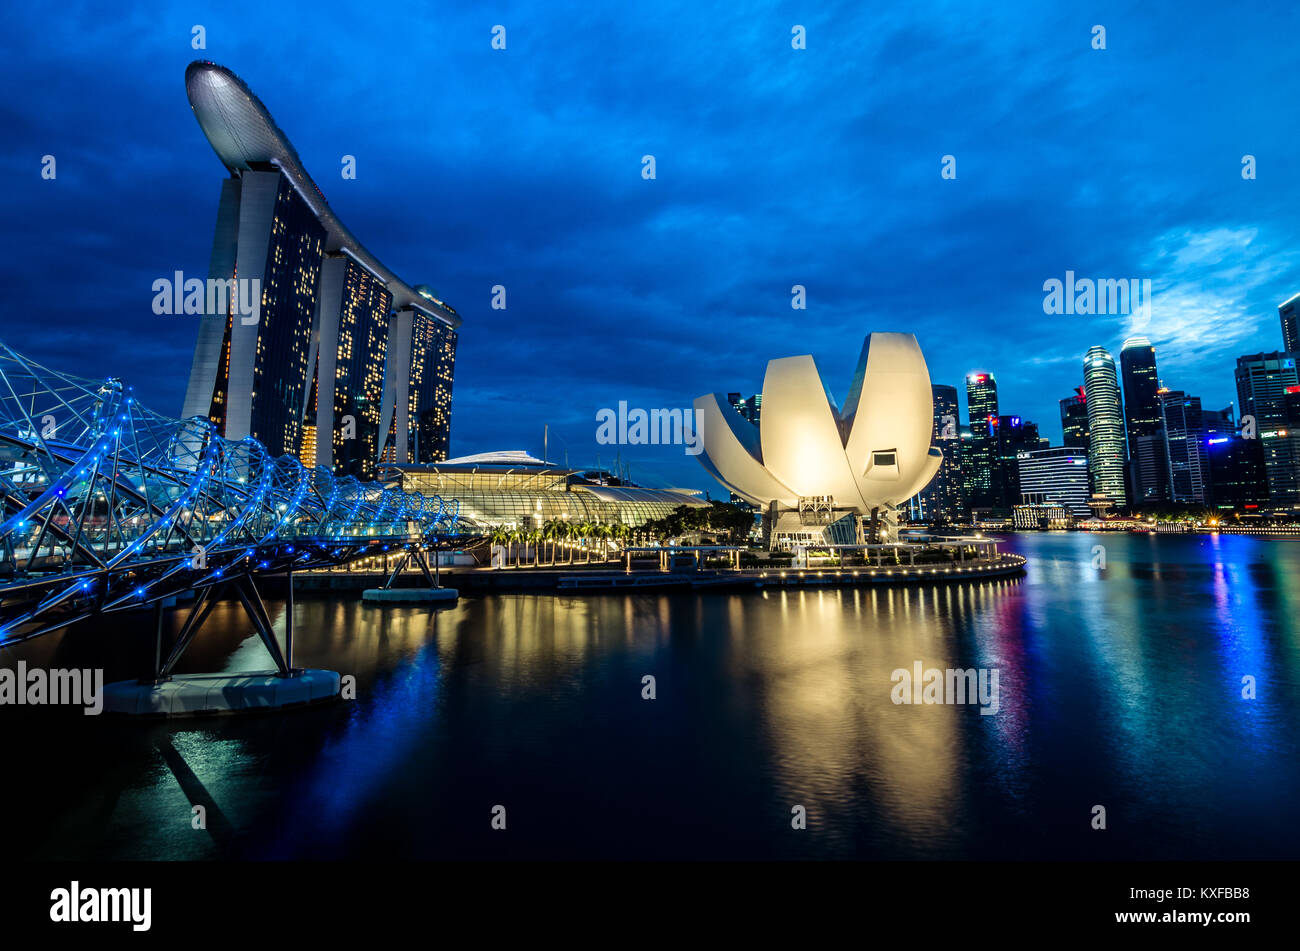 A beautiful blue hour at Marina Bay with Marina Bay Sands Hotel at the background, one of the most spectacular Hotel in Singapore. Stock Photo